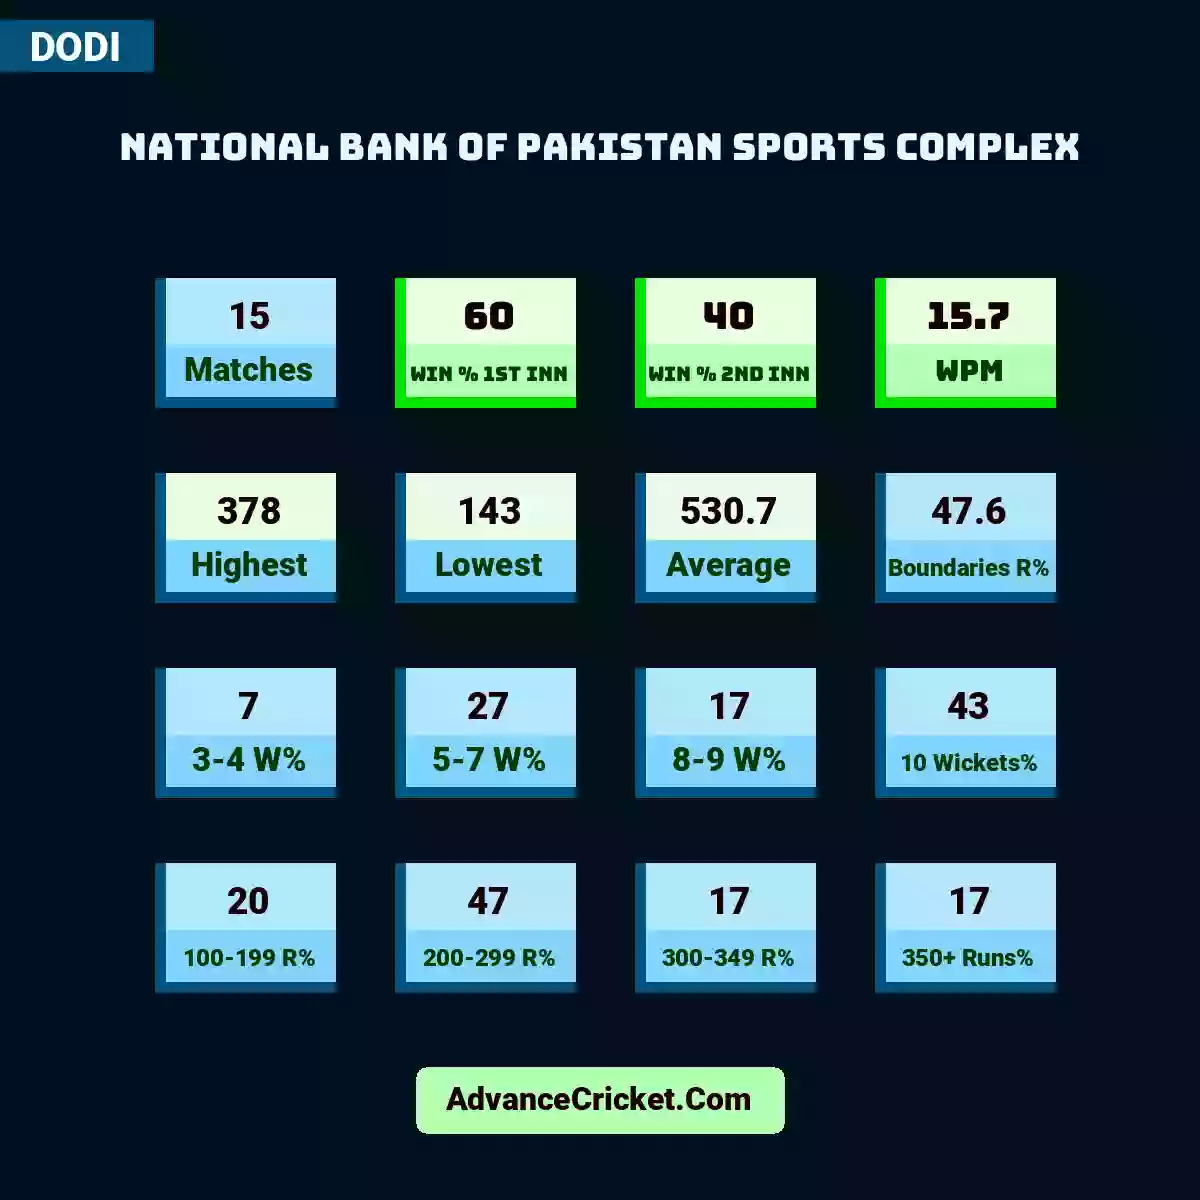 Image showing National Bank of Pakistan Sports Complex with Matches: 15, Win % 1st Inn: 60, Win % 2nd Inn: 40, WPM: 15.7, Highest: 378, Lowest: 143, Average: 530.7, Boundaries R%: 47.6, 3-4 W%: 7, 5-7 W%: 27, 8-9 W%: 17, 10 Wickets%: 43, 100-199 R%: 20, 200-299 R%: 47, 300-349 R%: 17, 350+ Runs%: 17